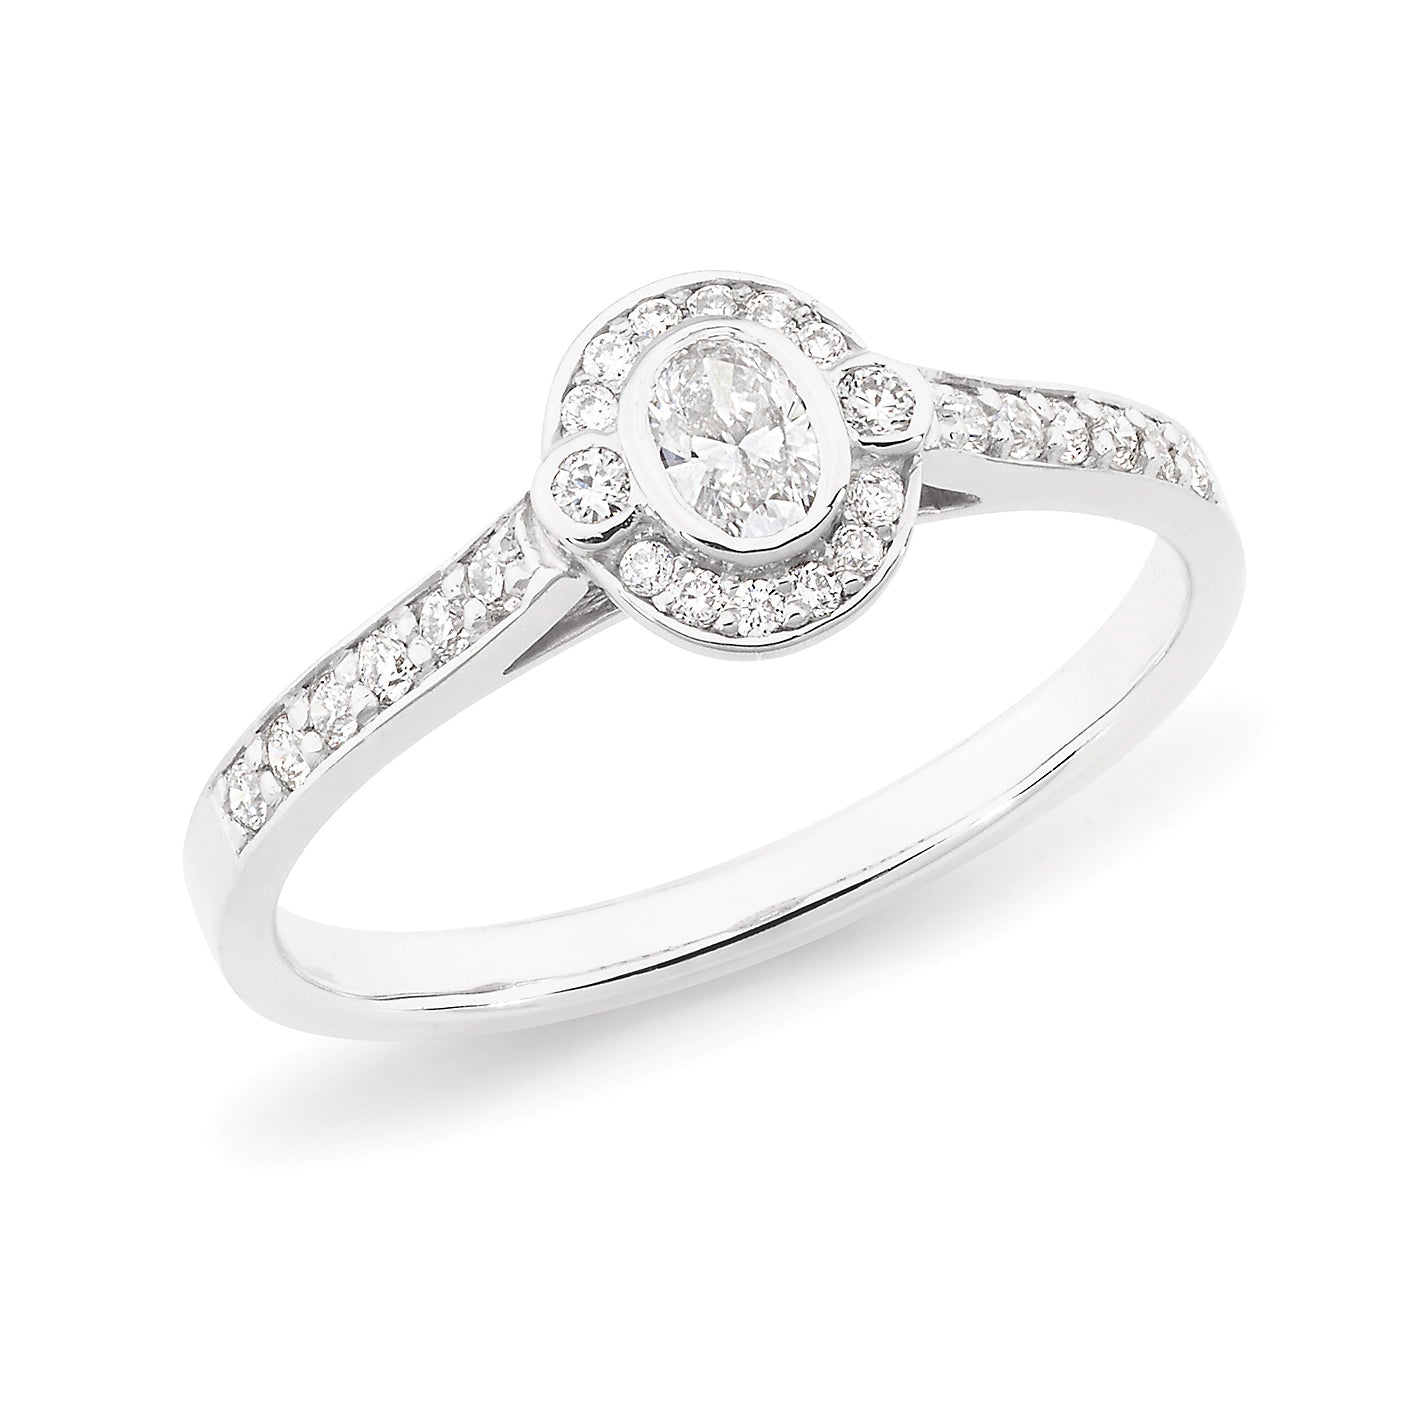 Diamond Set Halo-Style Engagement Ring in 18ct White Gold